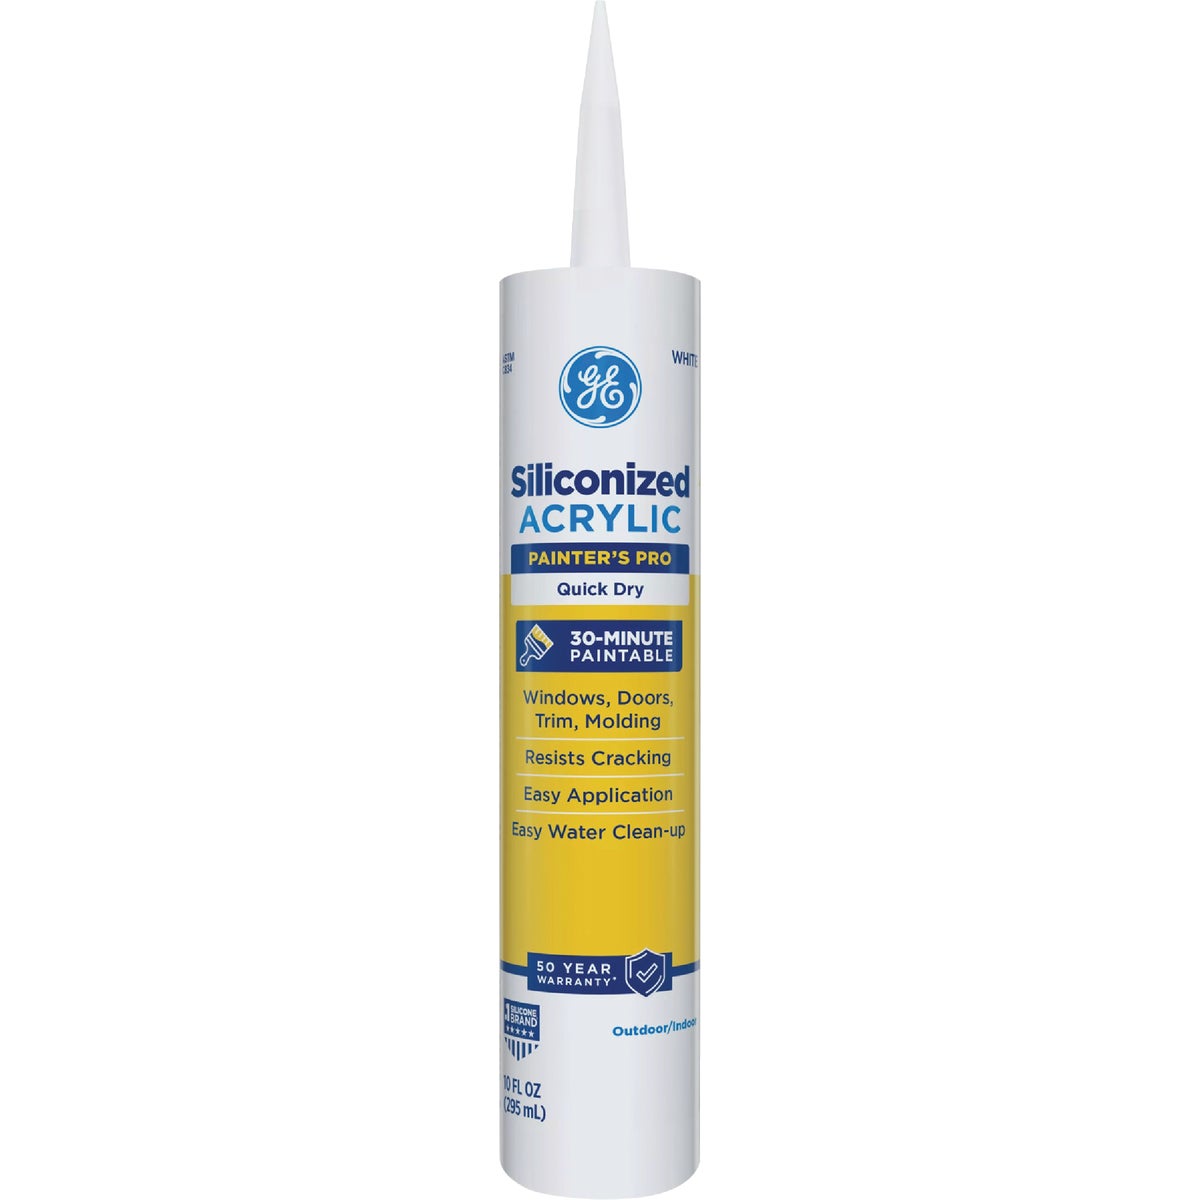 Item 791465, Finish paint projects faster with GE Siliconized Acrylic Painters Pro Quick